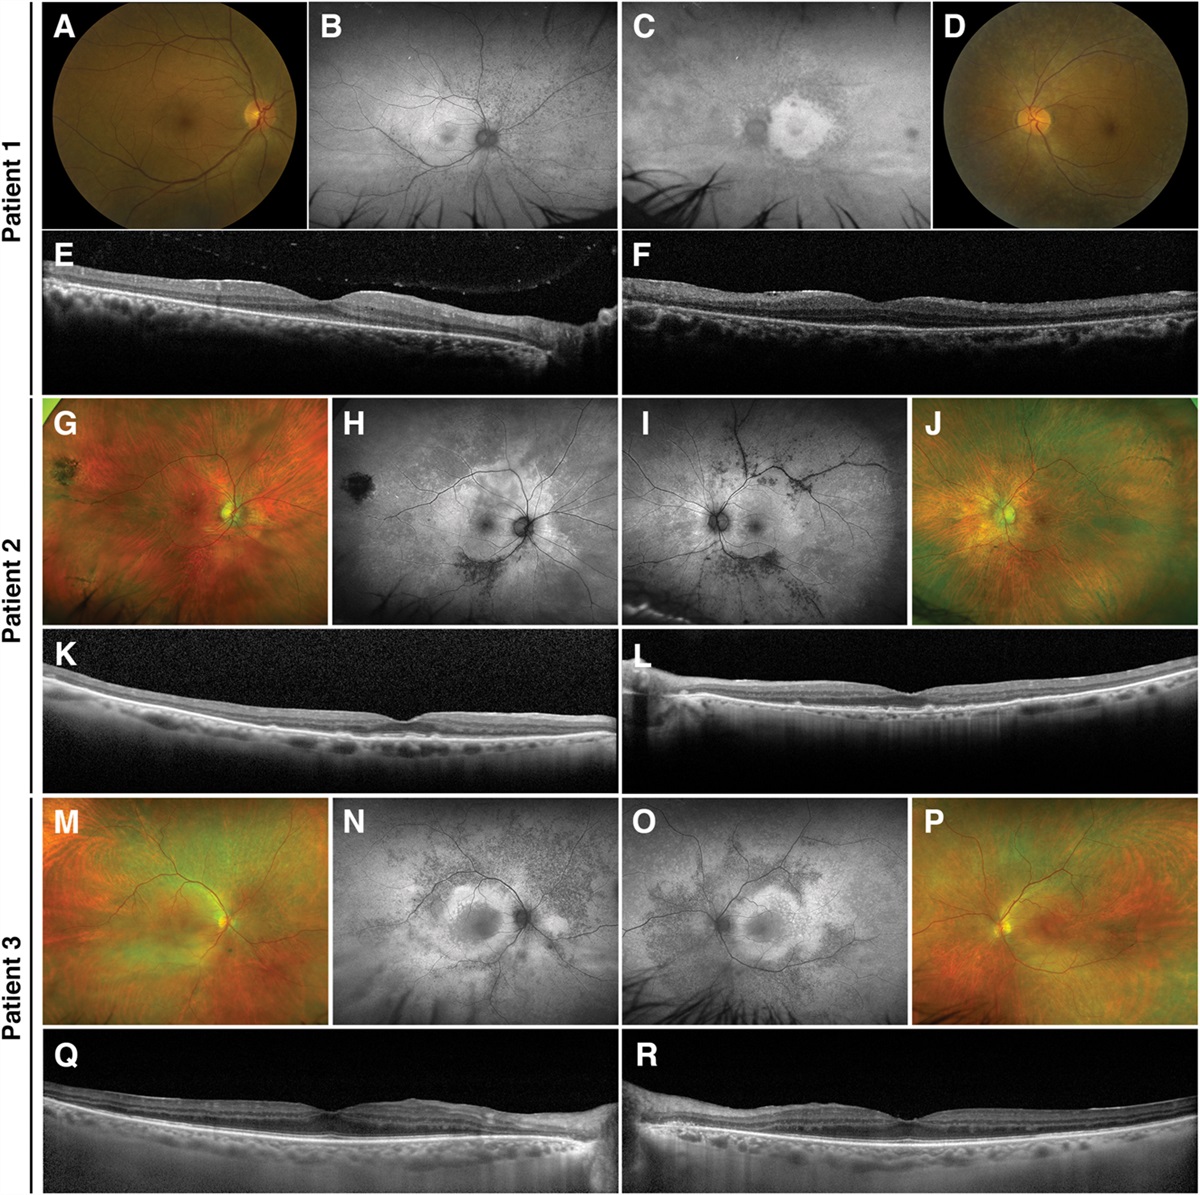 TOWARD AN IMAGING-CENTRIC DEFINITION OF NONPARANEOPLASTIC AUTOIMMUNE RETINOPATHY